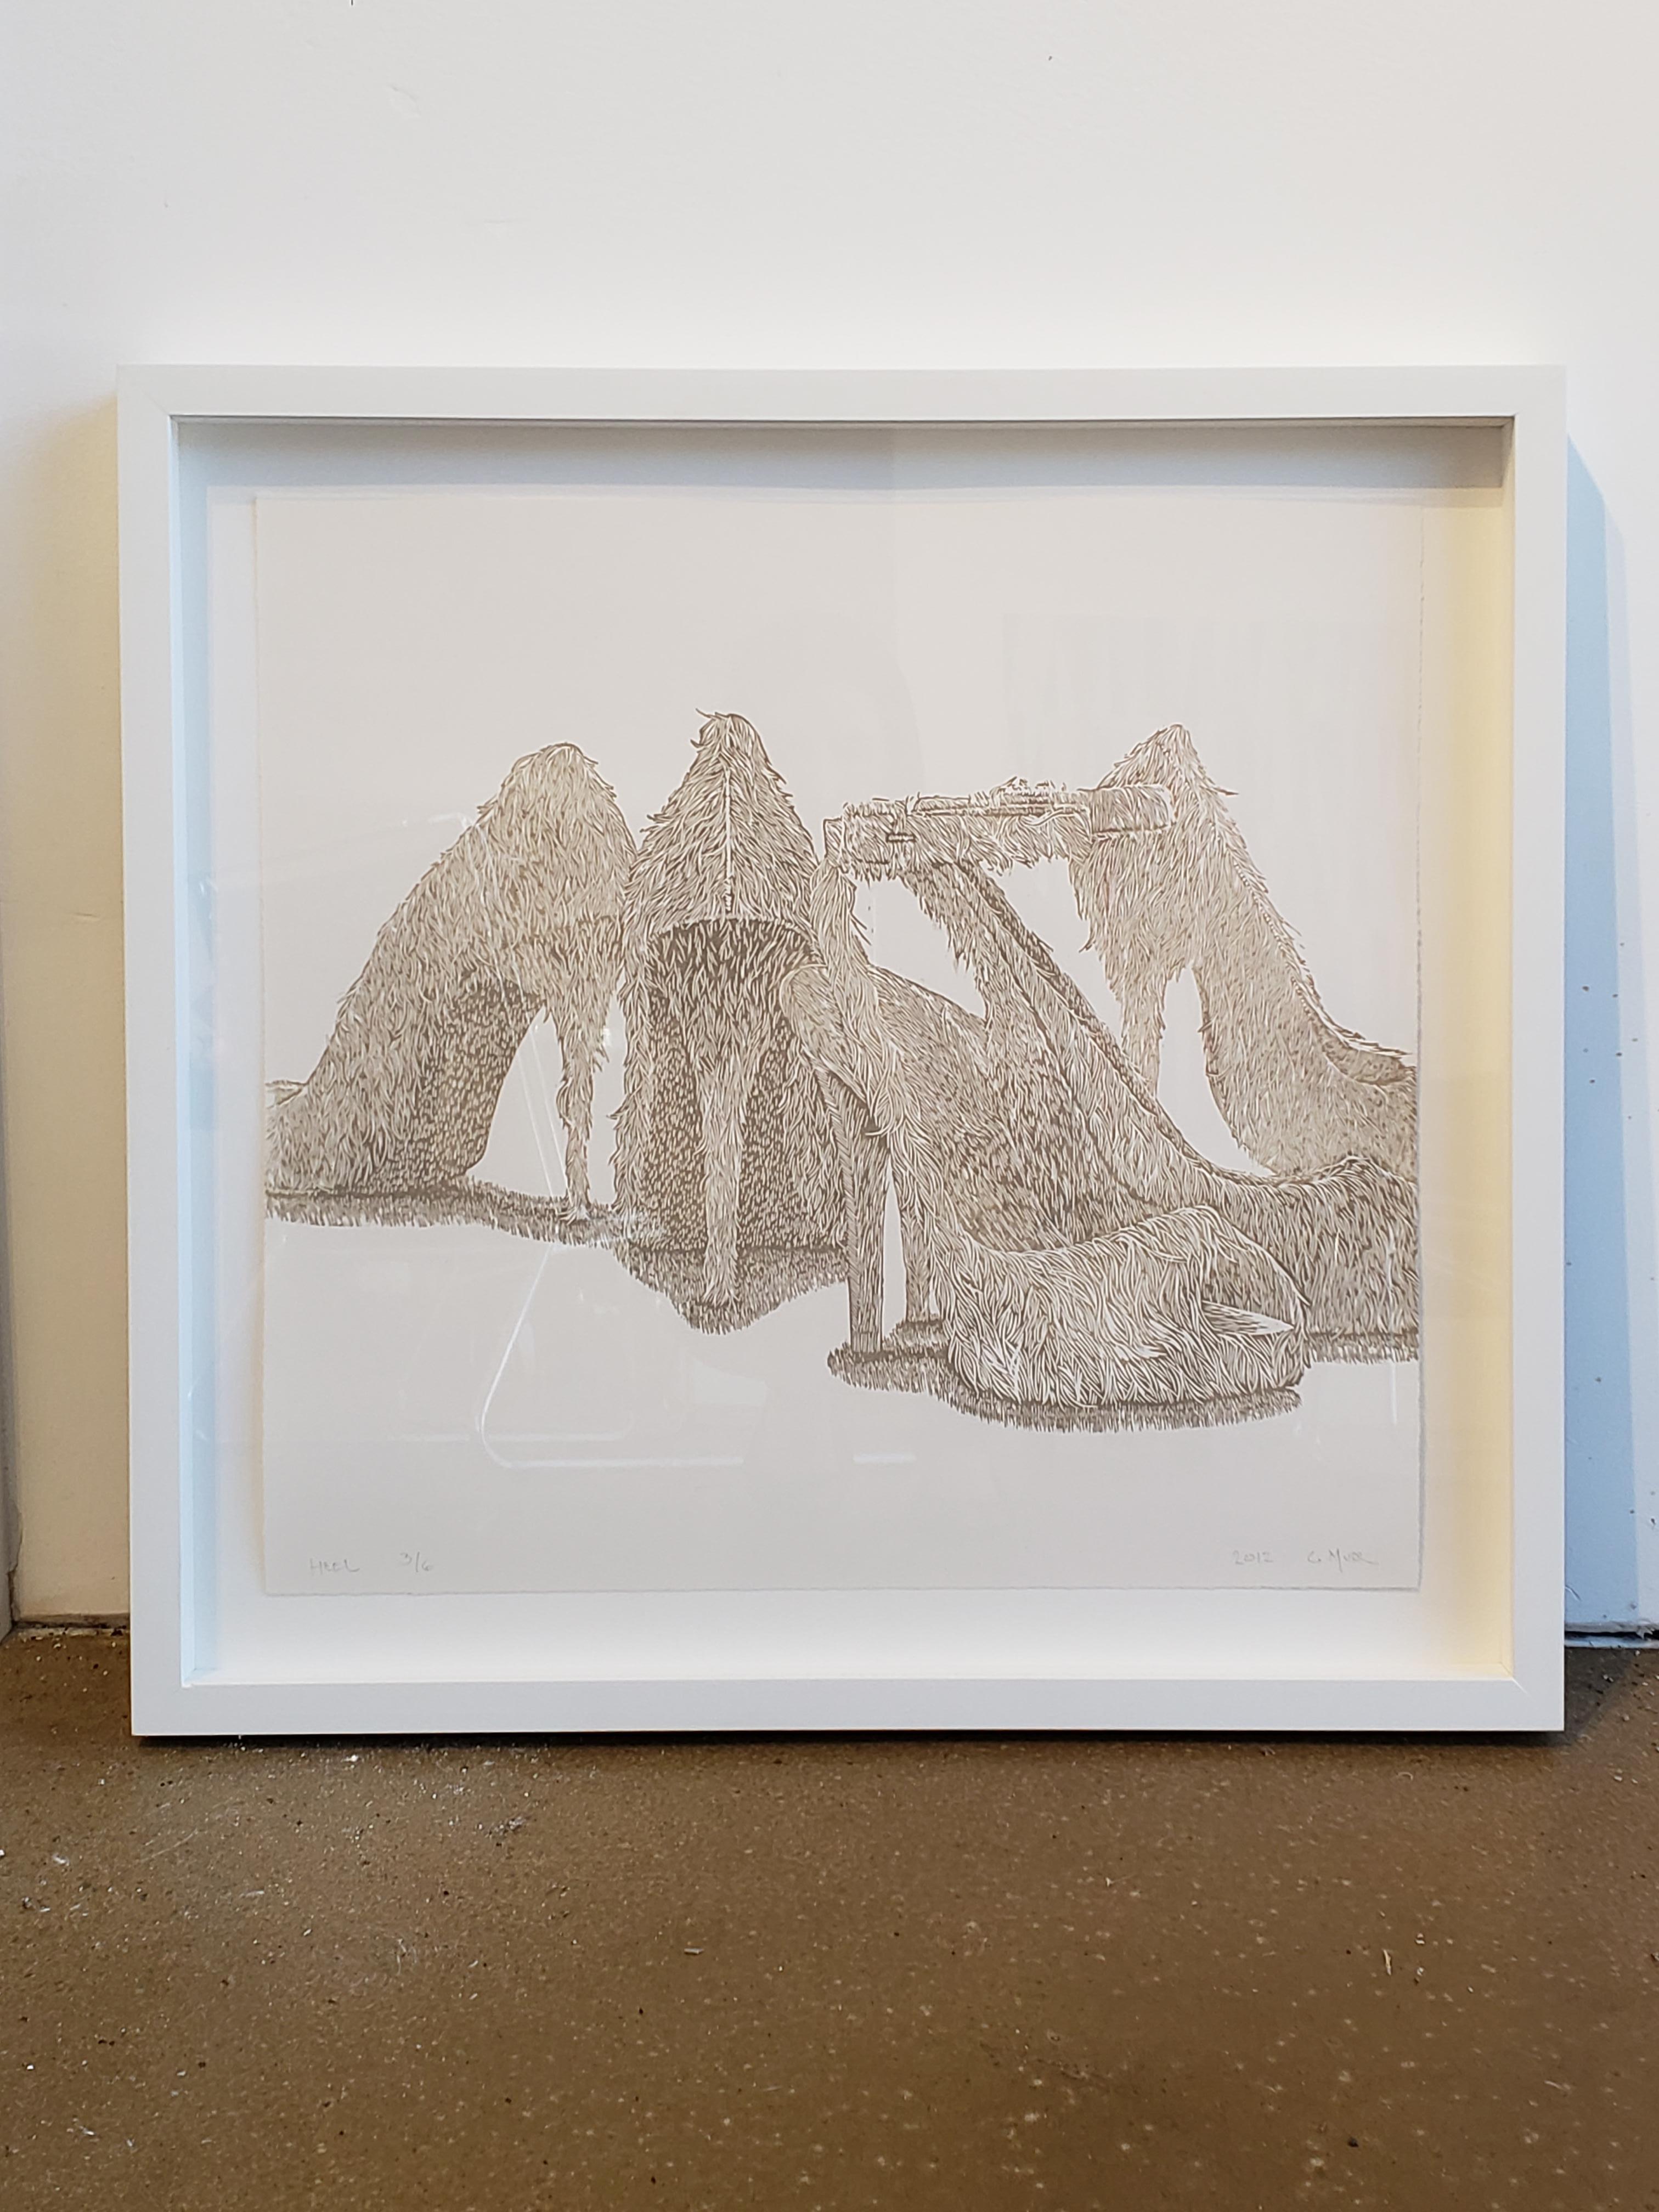 Greg Murr combines painting and drawing in airy compositions that function as philosophical inquiries into the flux of the natural world. In this limited edition woodcut print, Murr offers the viewer a 